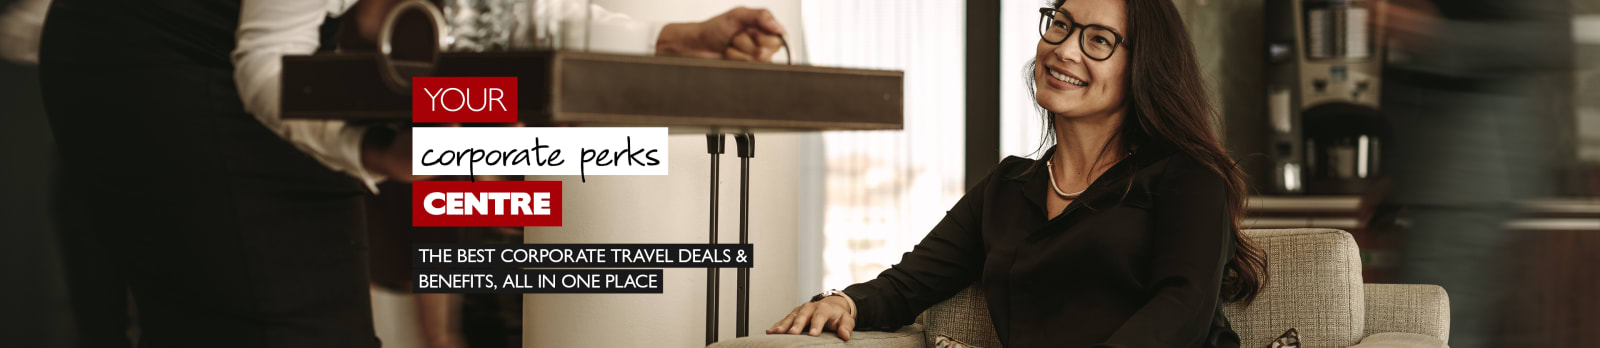 Your corporate perks centre - the best corporate travel deals & benefits, all in one place. Smiling woman being brought a try of food and beverages